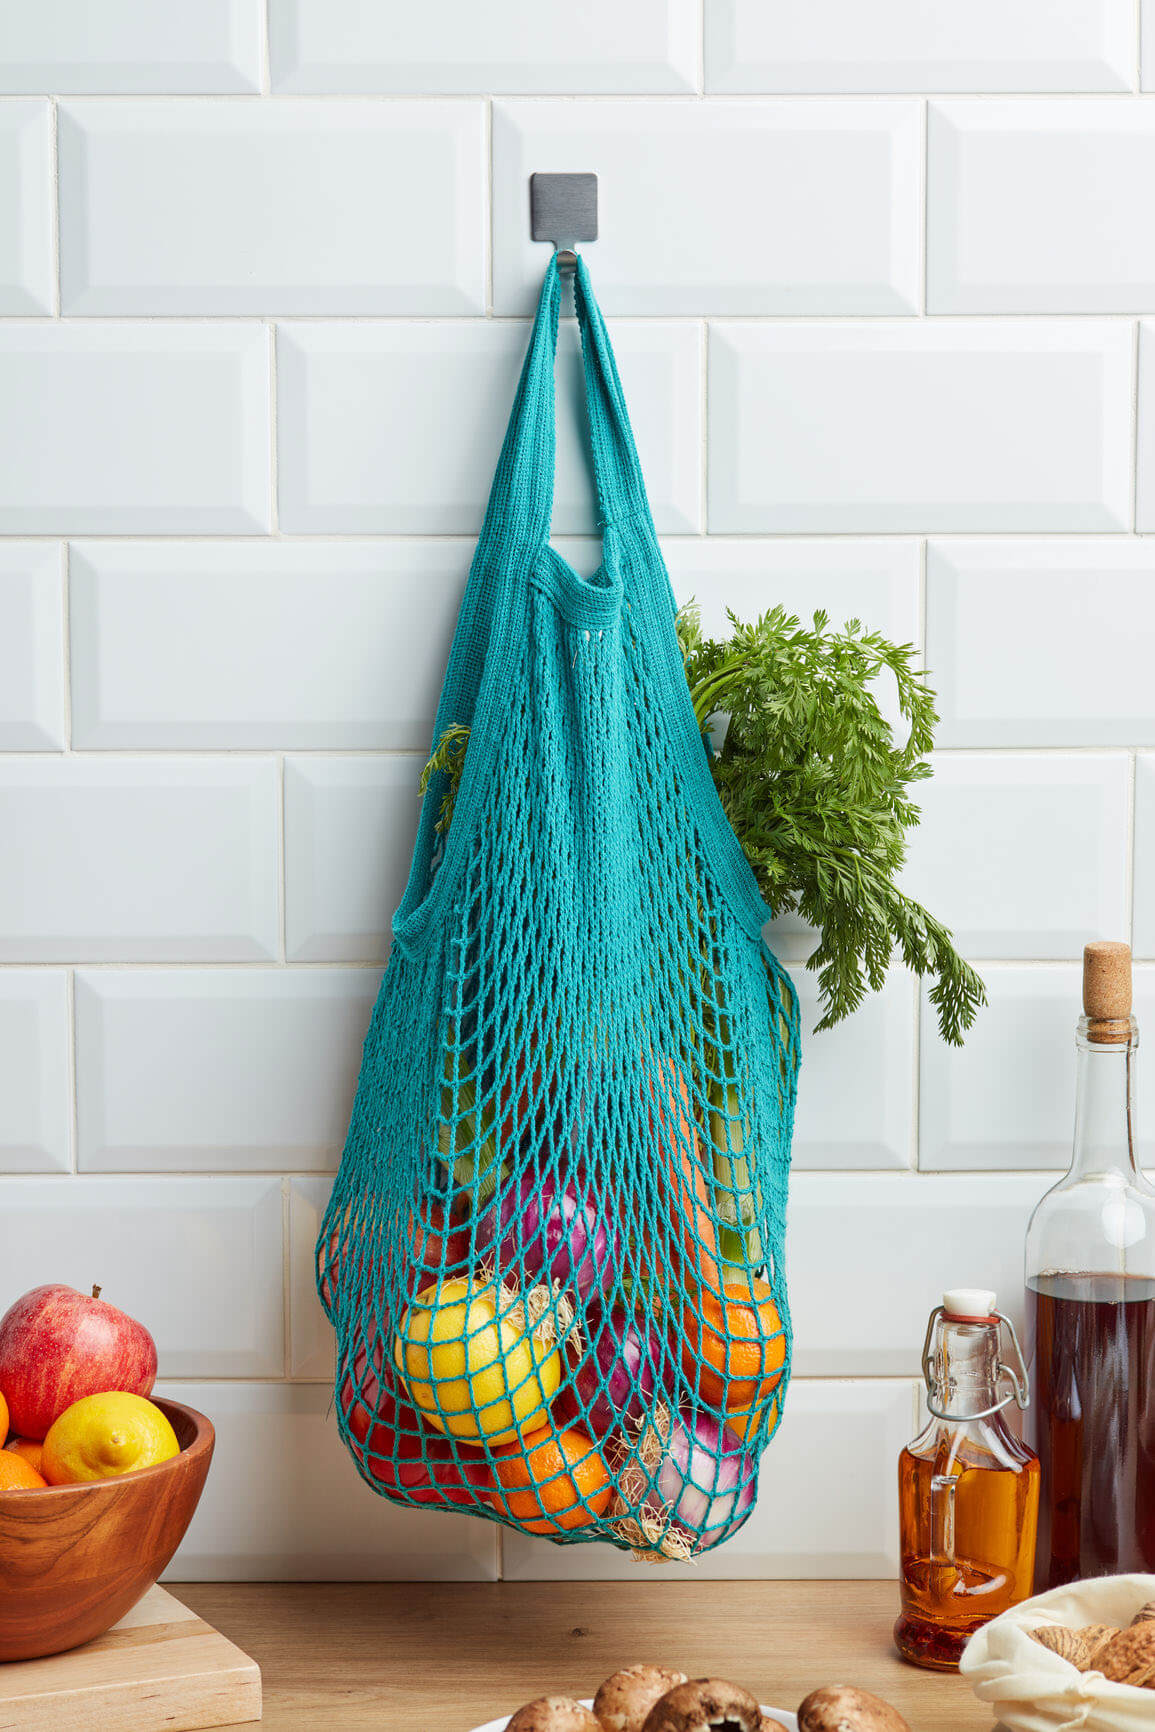 Mesh tote bag for groceries